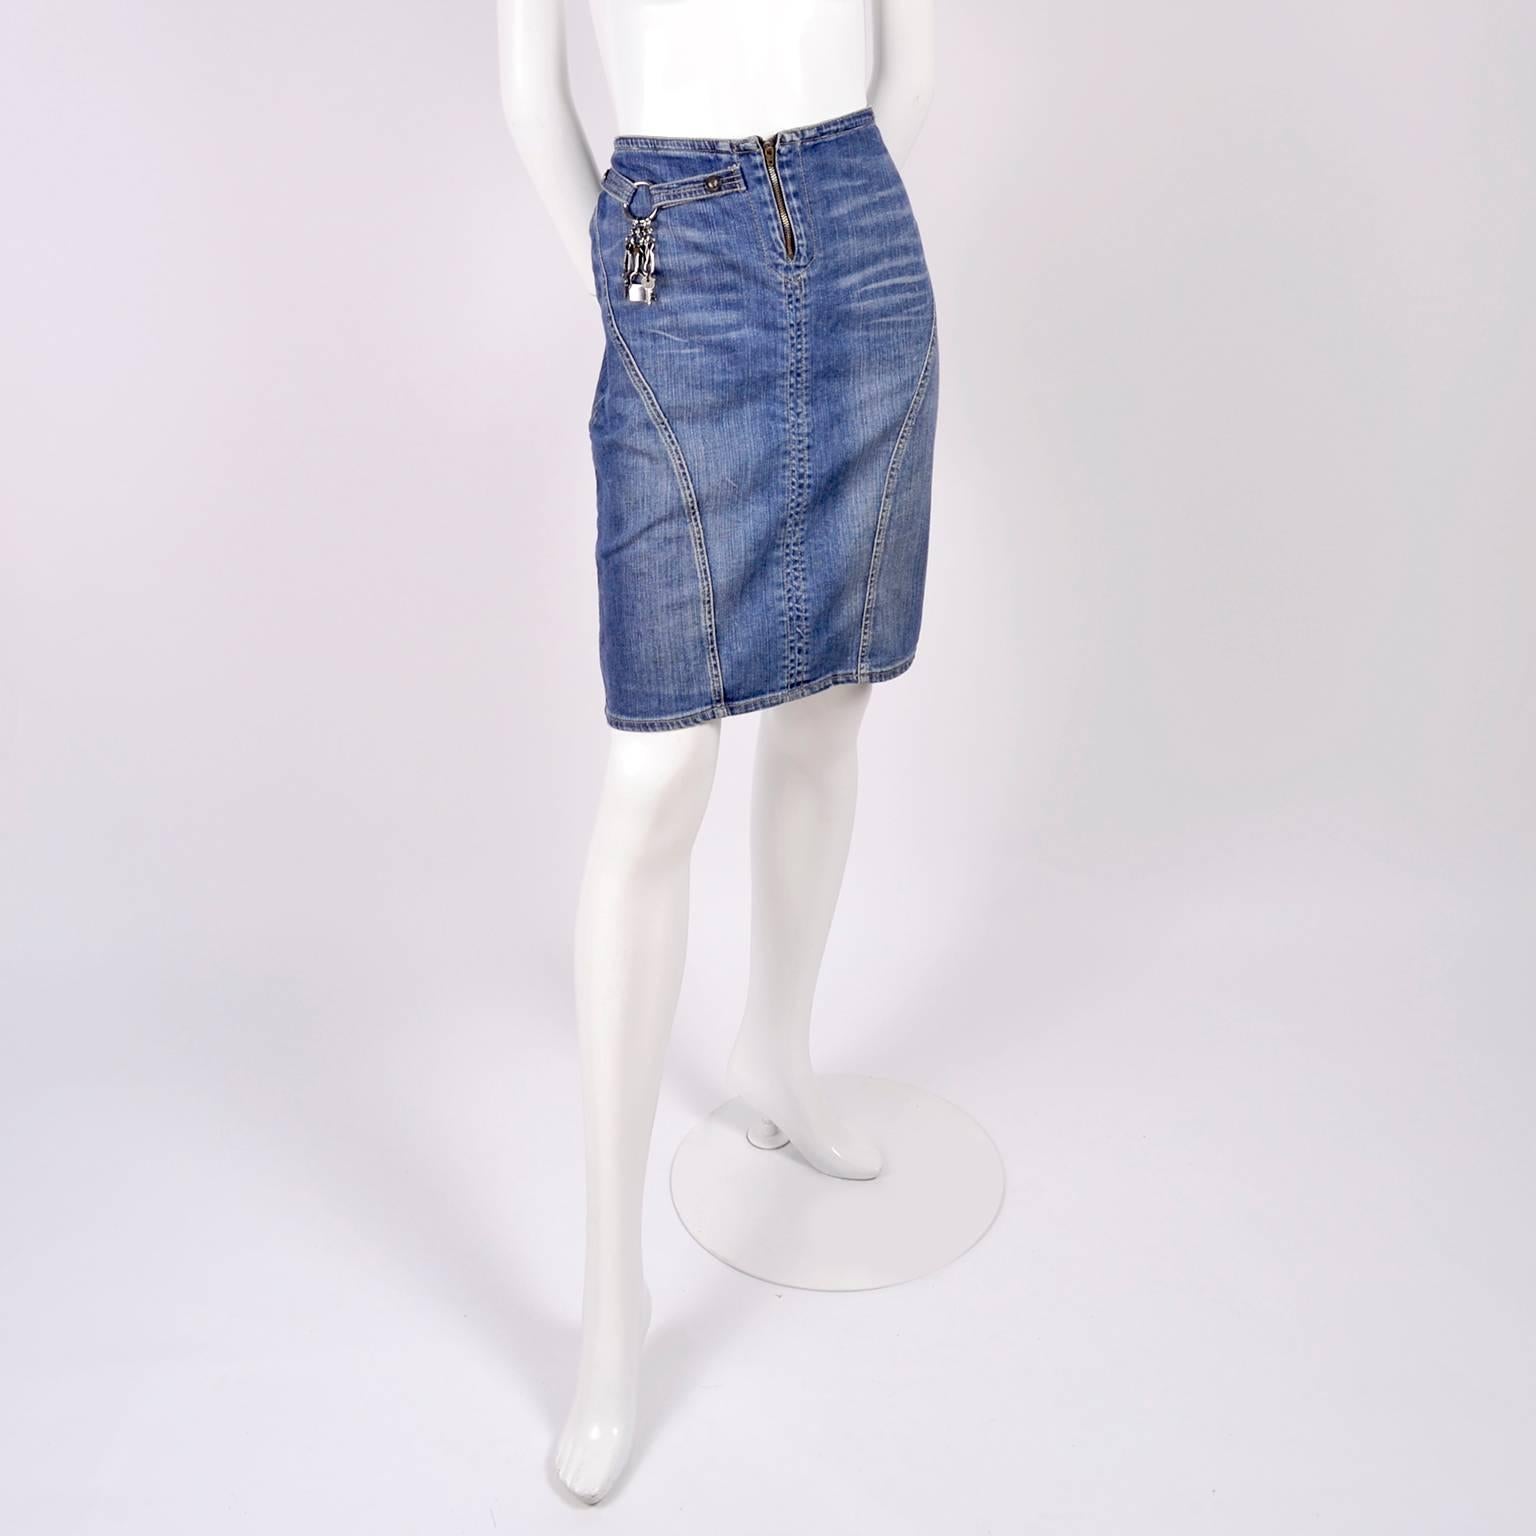 This is a great Versace jeans couture denim skirt with dangling charms on a metal ring near the waist.  The jeans have a front zipper and interesting seams that make for a flattering fit. Labeled a size 28/42 We estimate this skirt to fit a modern